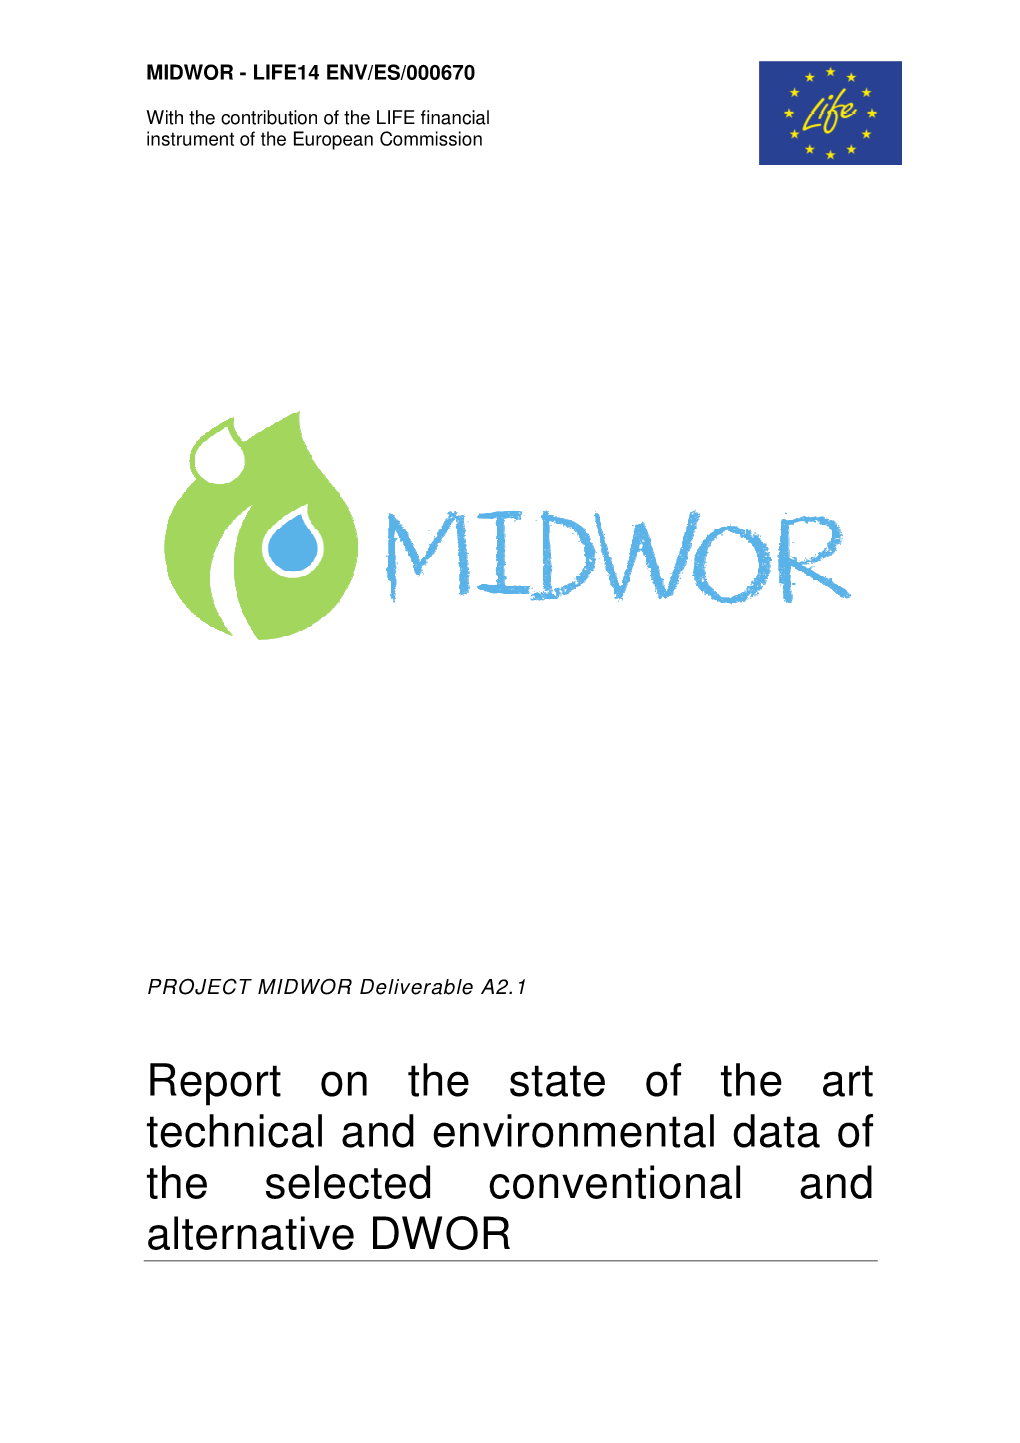 Report on the State of the Art Technical and Environmental Data of the Selected Conventional and Alternative DWOR